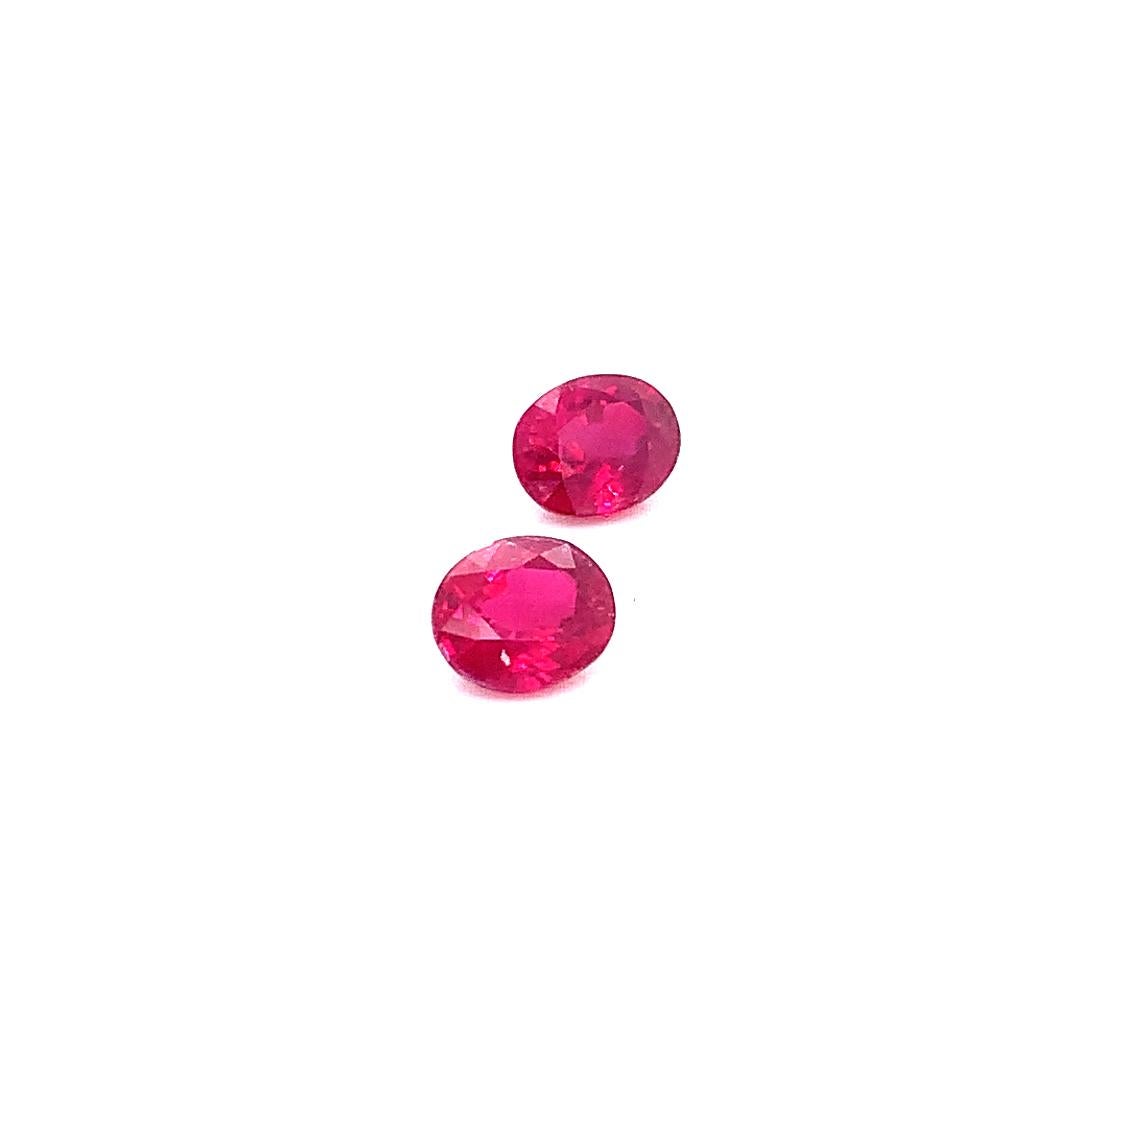 2mm ROUND MATCHING PAIR CABOCHON NATURAL PIGEON BLOOD RUBY 